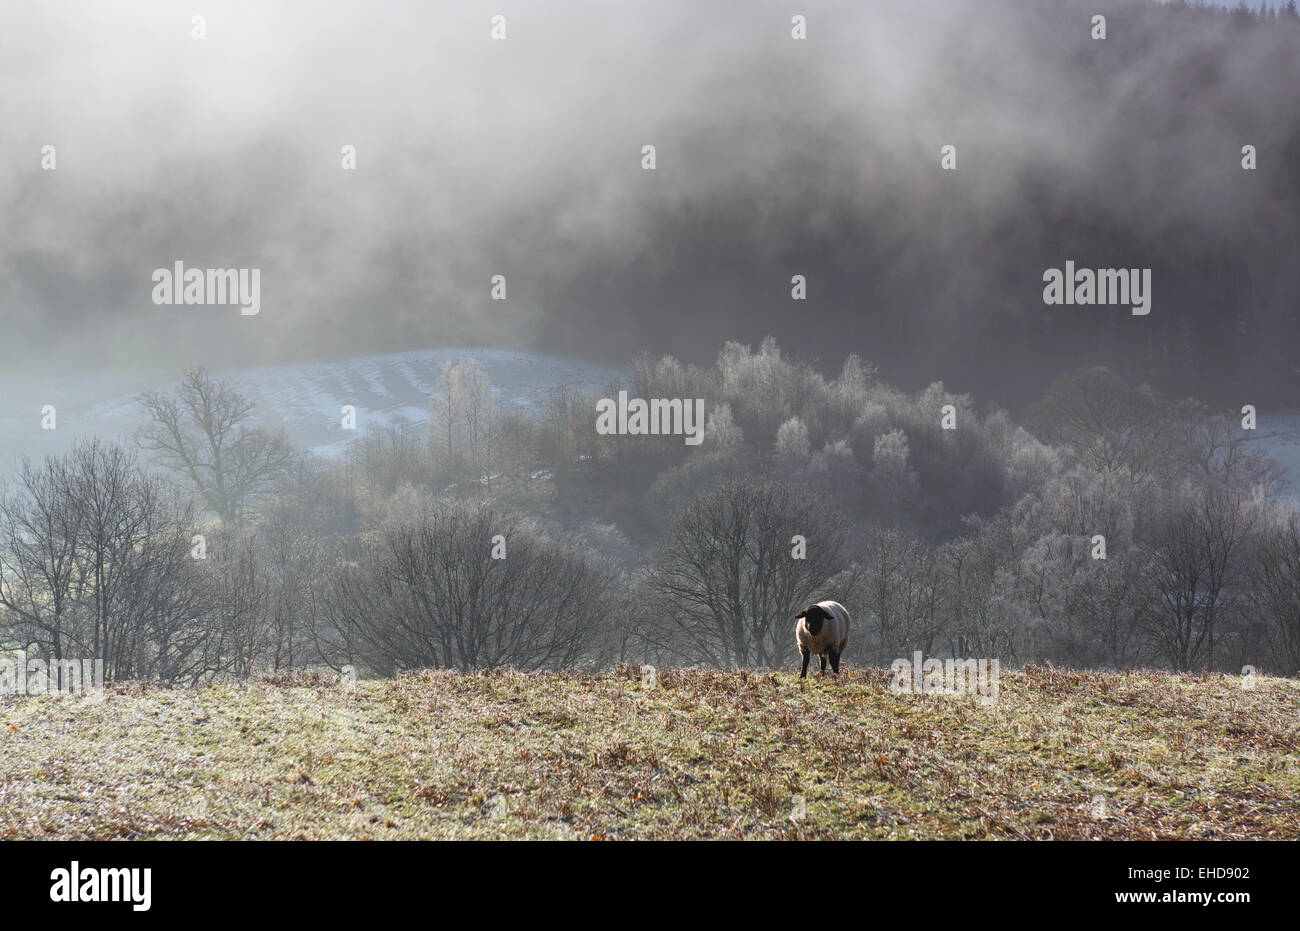 farmland with sheep & trees and wintry atmospheric ethereal / magical light Stock Photo